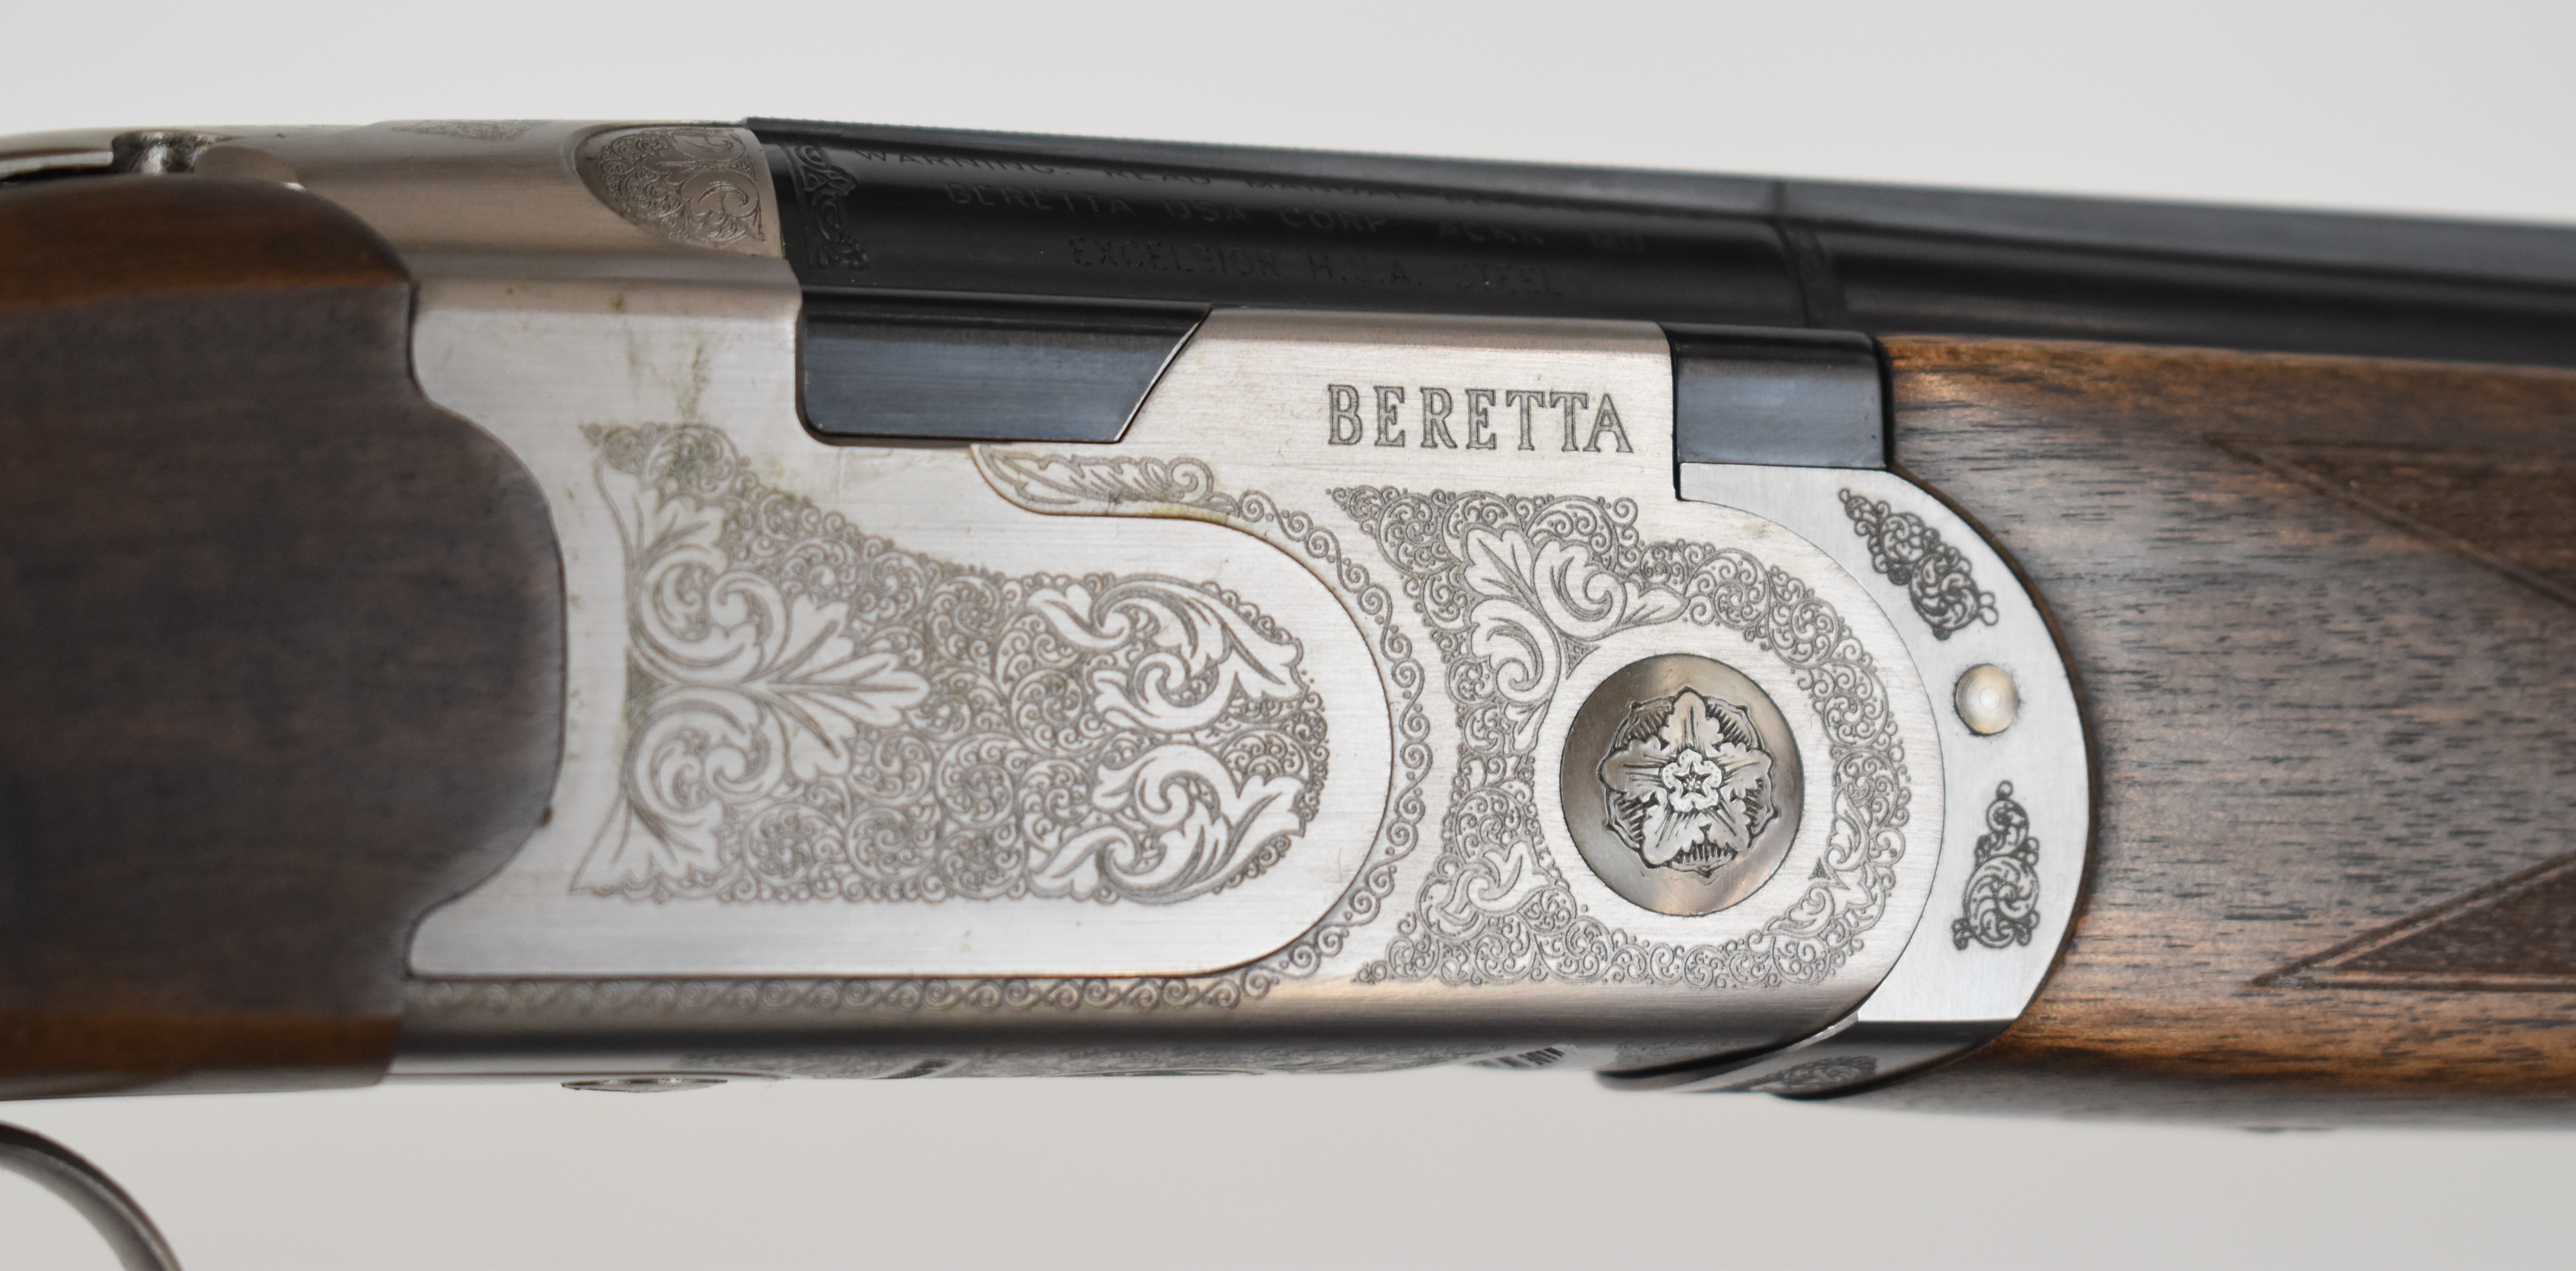 Beretta 686 Silver Pigeon I 28 bore over and under ejector shotgun with named and engraved lock - Image 6 of 28